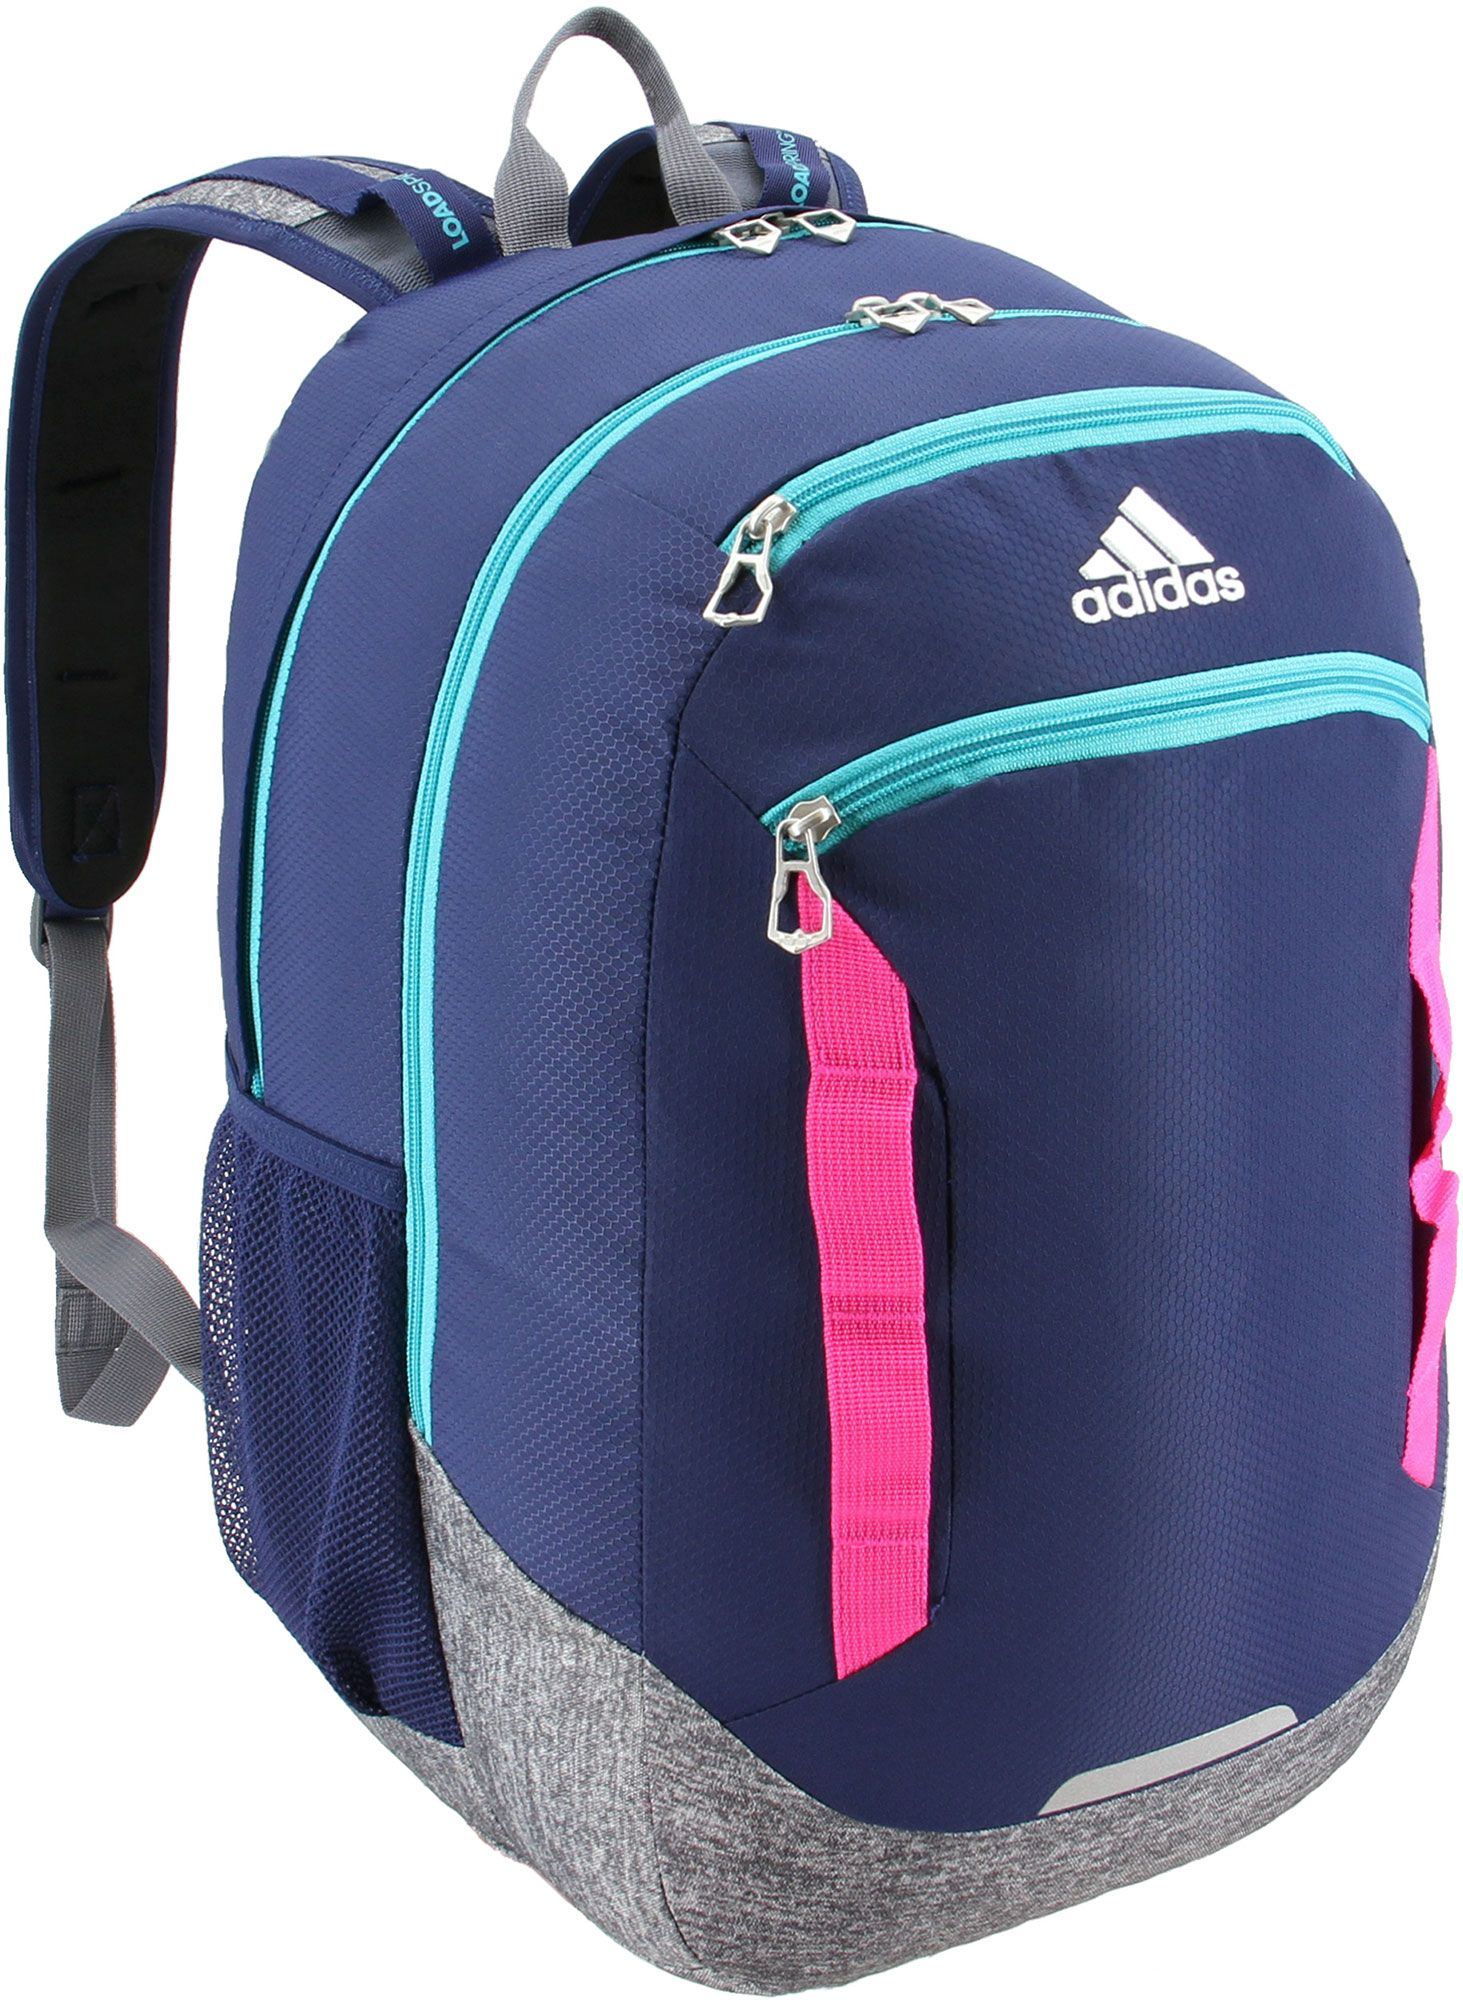 adidas excel iv backpack review